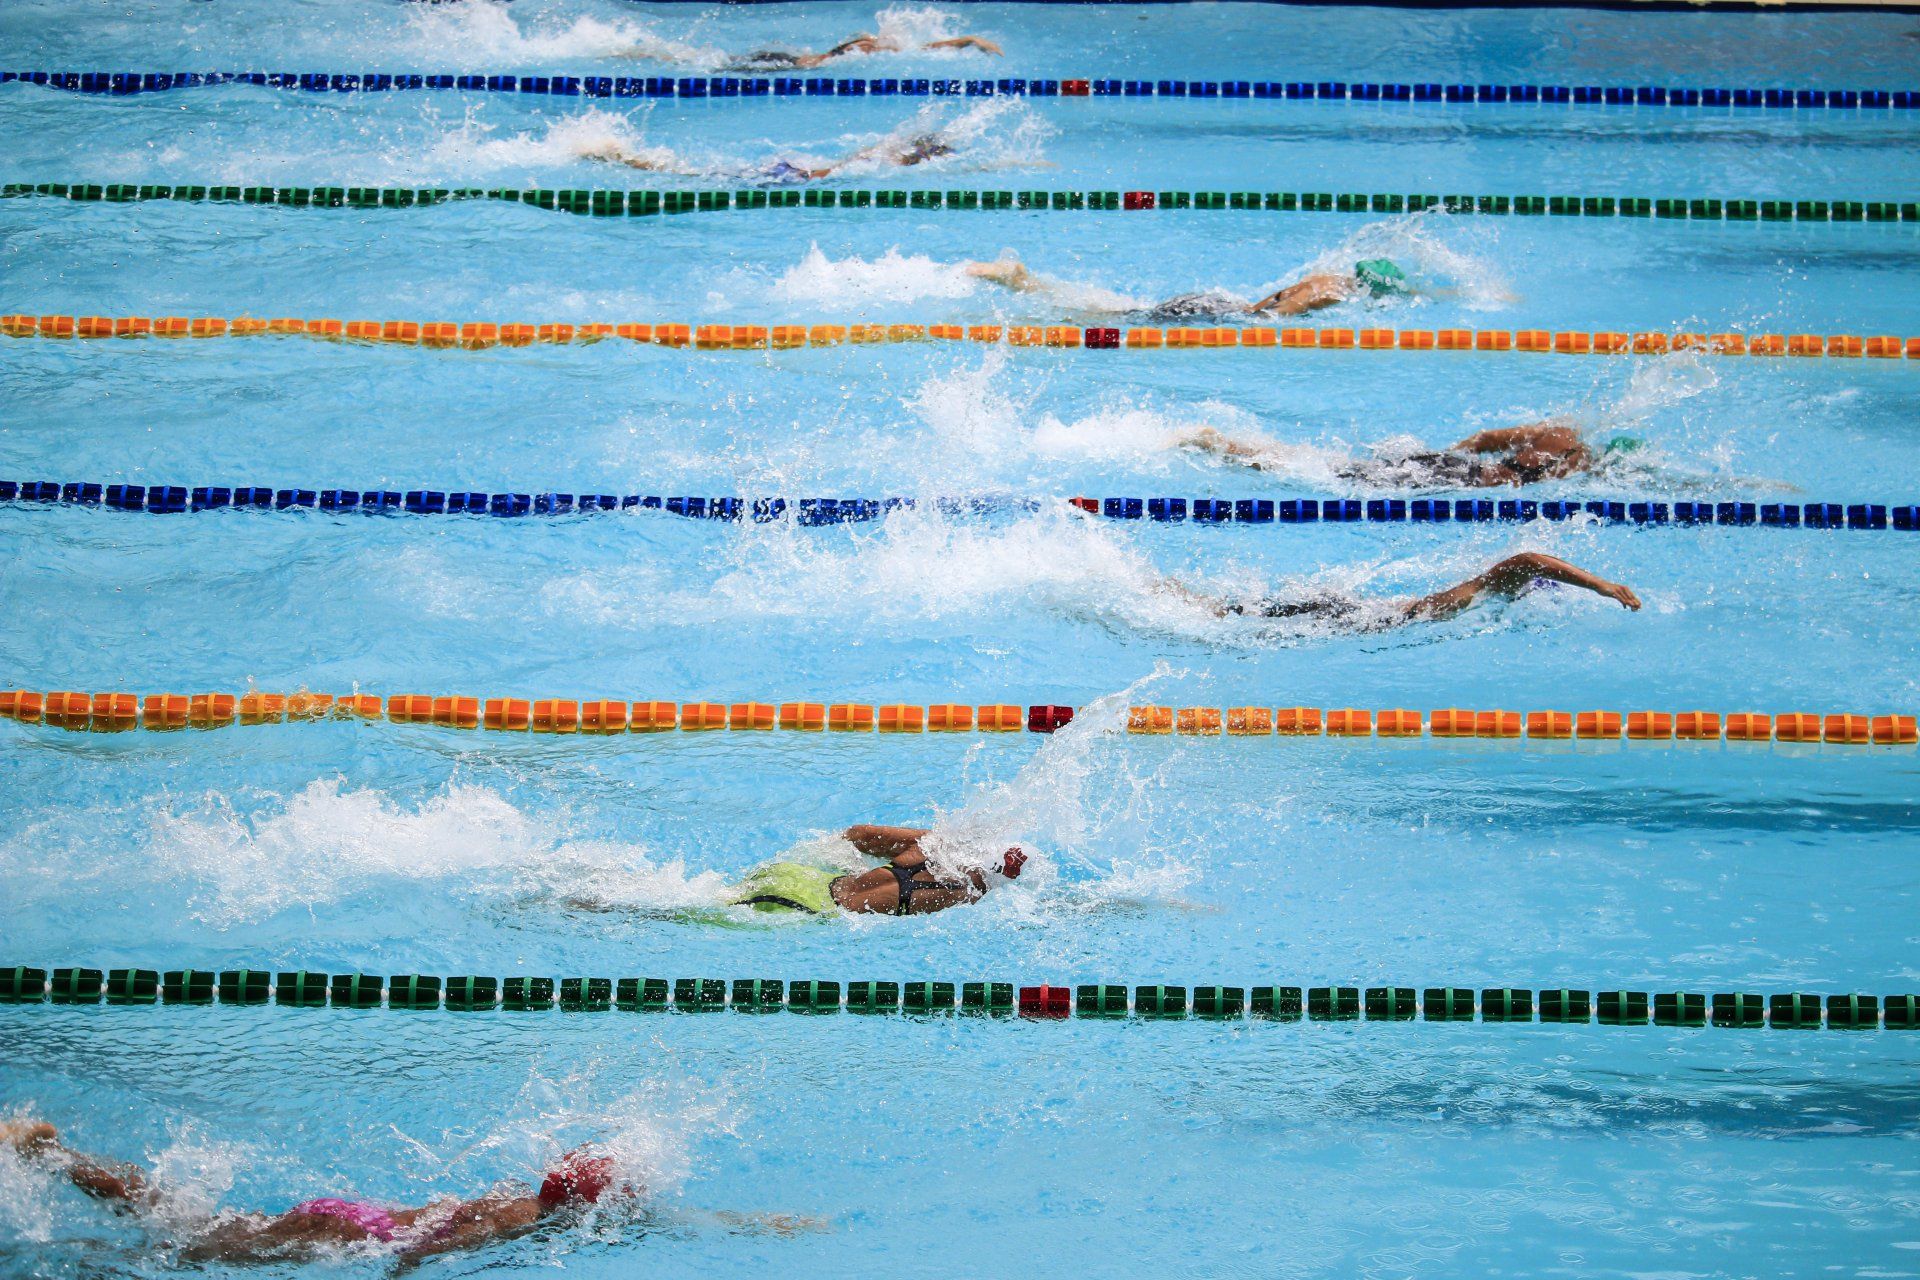 swimmers racing in their lanes